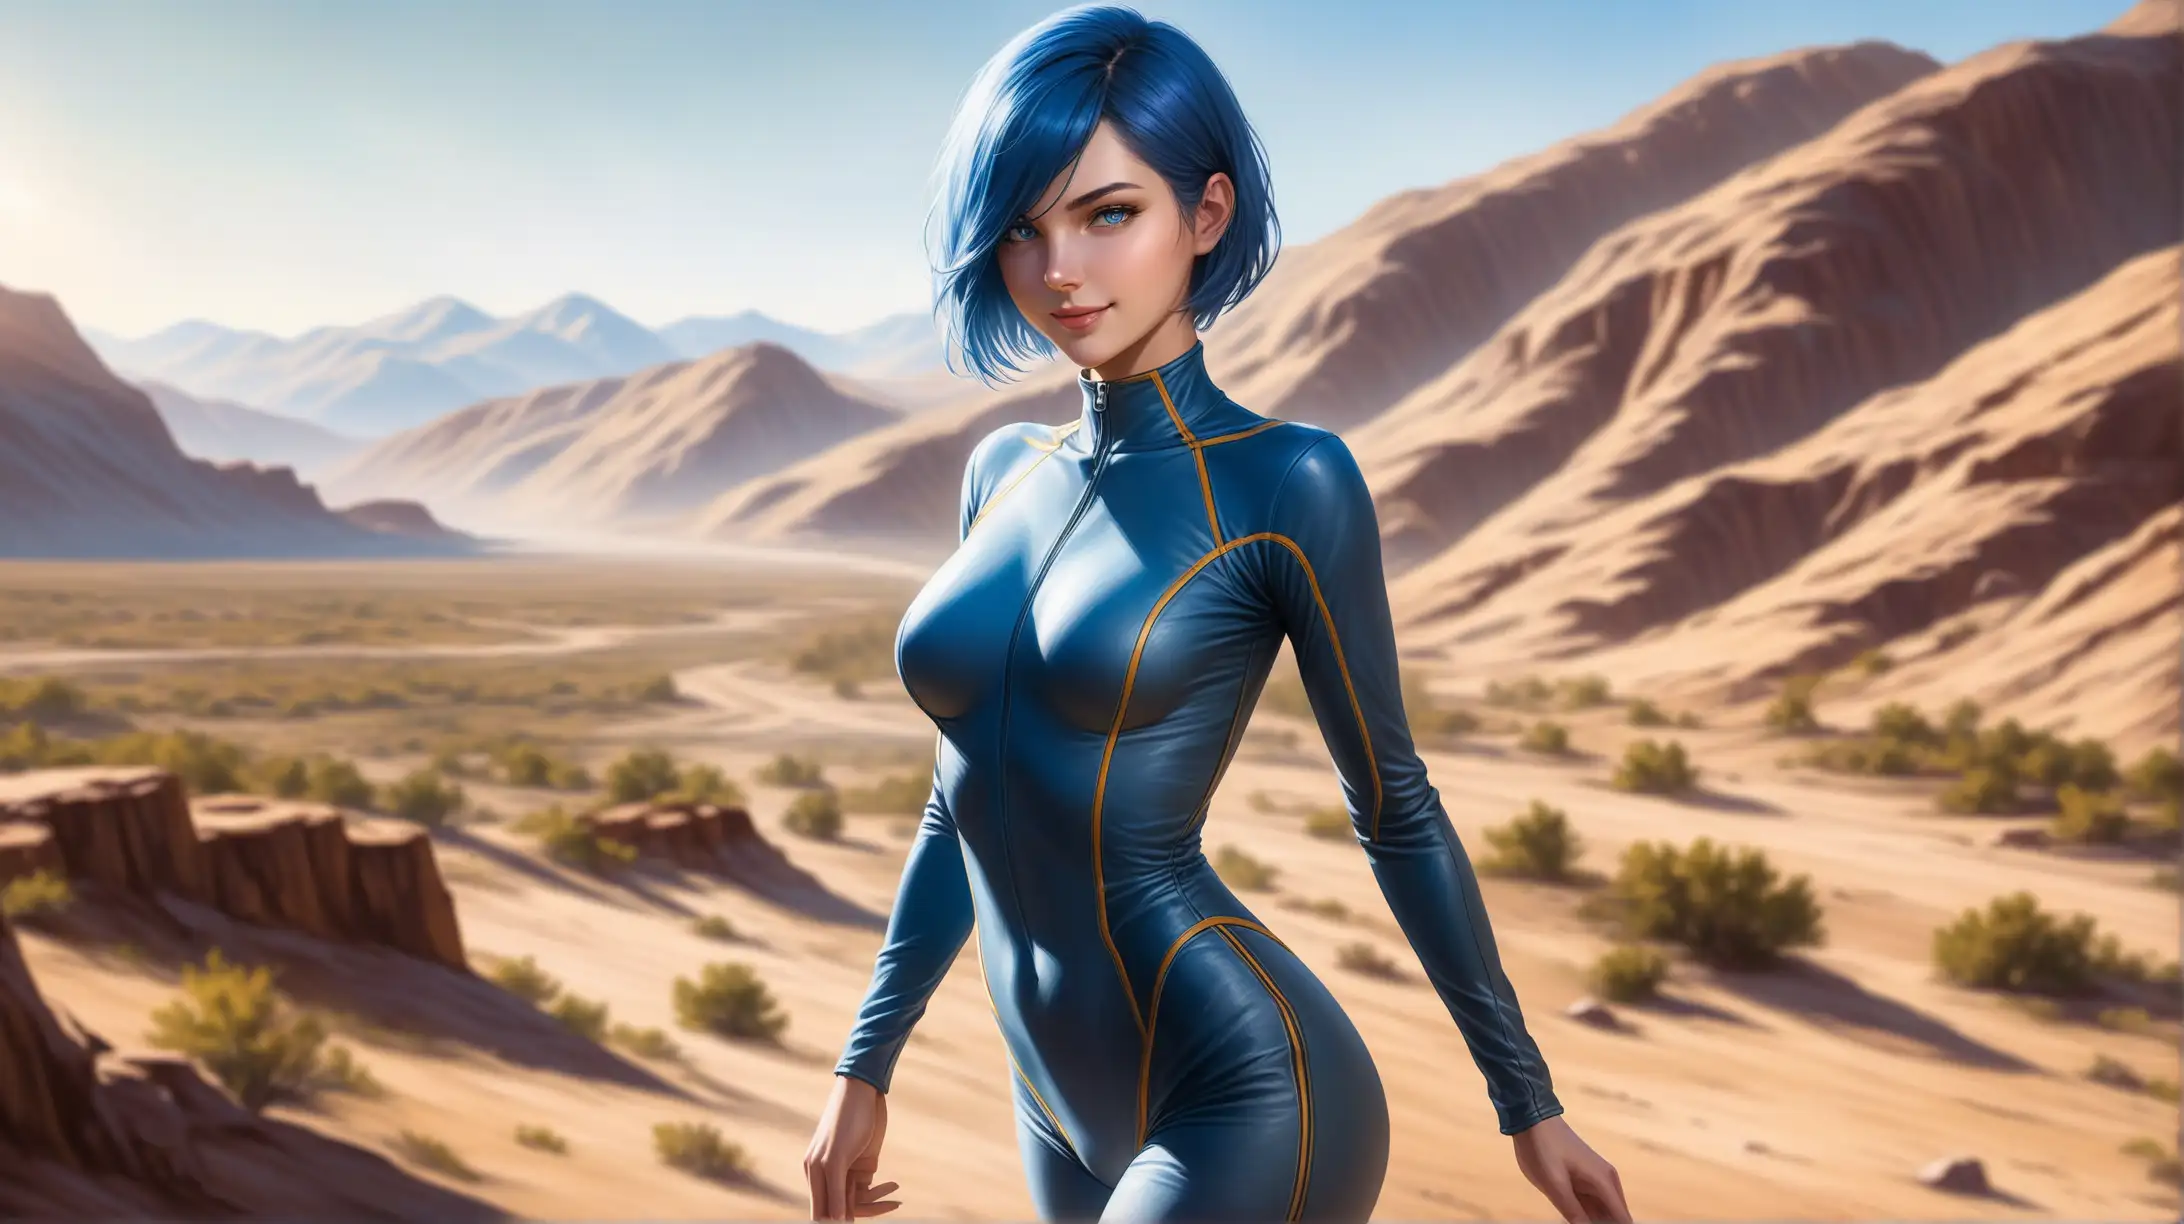 Draw a woman, short blue hair covering one eye, blue eyes, slender figure, high quality, realistic, accurate, detailed, long shot, natural lighting, outdoors, outfit inspired from Fallout, seductive pose, smiling at the viewer